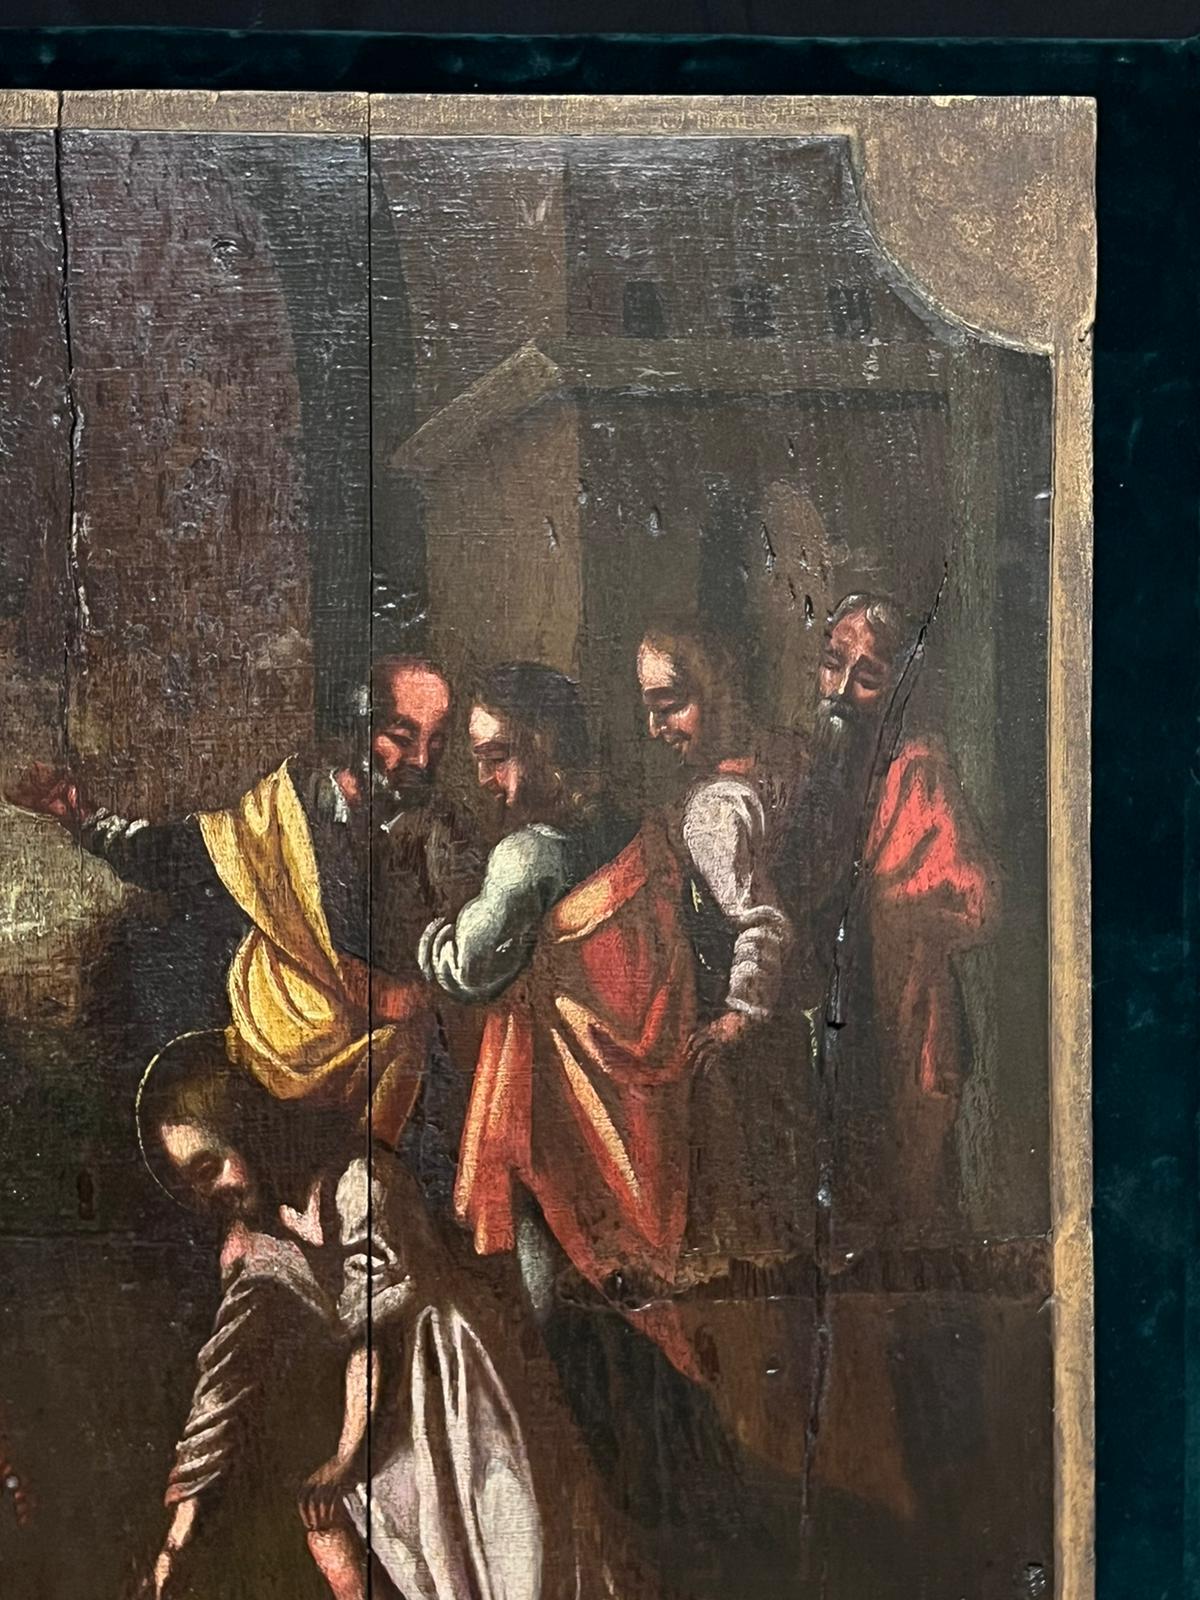 Biblical Figures, Large Gathering around Christ?
Dutch Old Master, early 17th century
oil painting on wood panel, stuck on velvet backing board
velvet board: 27 x 29 inches
board: 25.5 x 26 inches
provenance: private collection, France
condition: